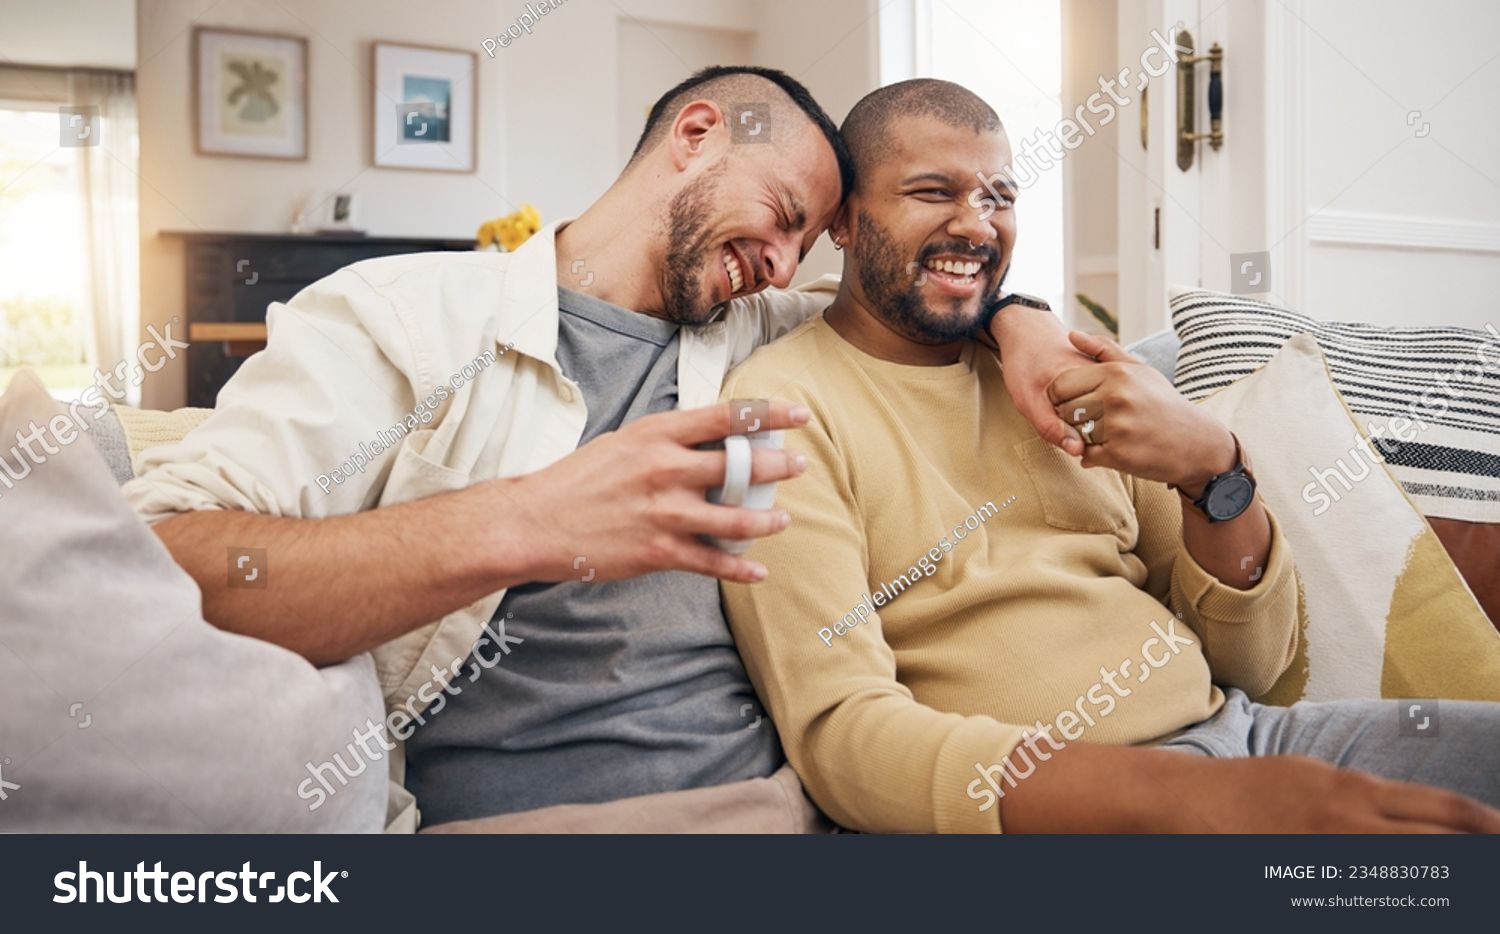 Laughing, relax and a gay couple on the sofa with coffee, conversation or love in a house. Happy, together and lgbt men on the living room couch for a funny story, communication or speaking with tea #2348830783